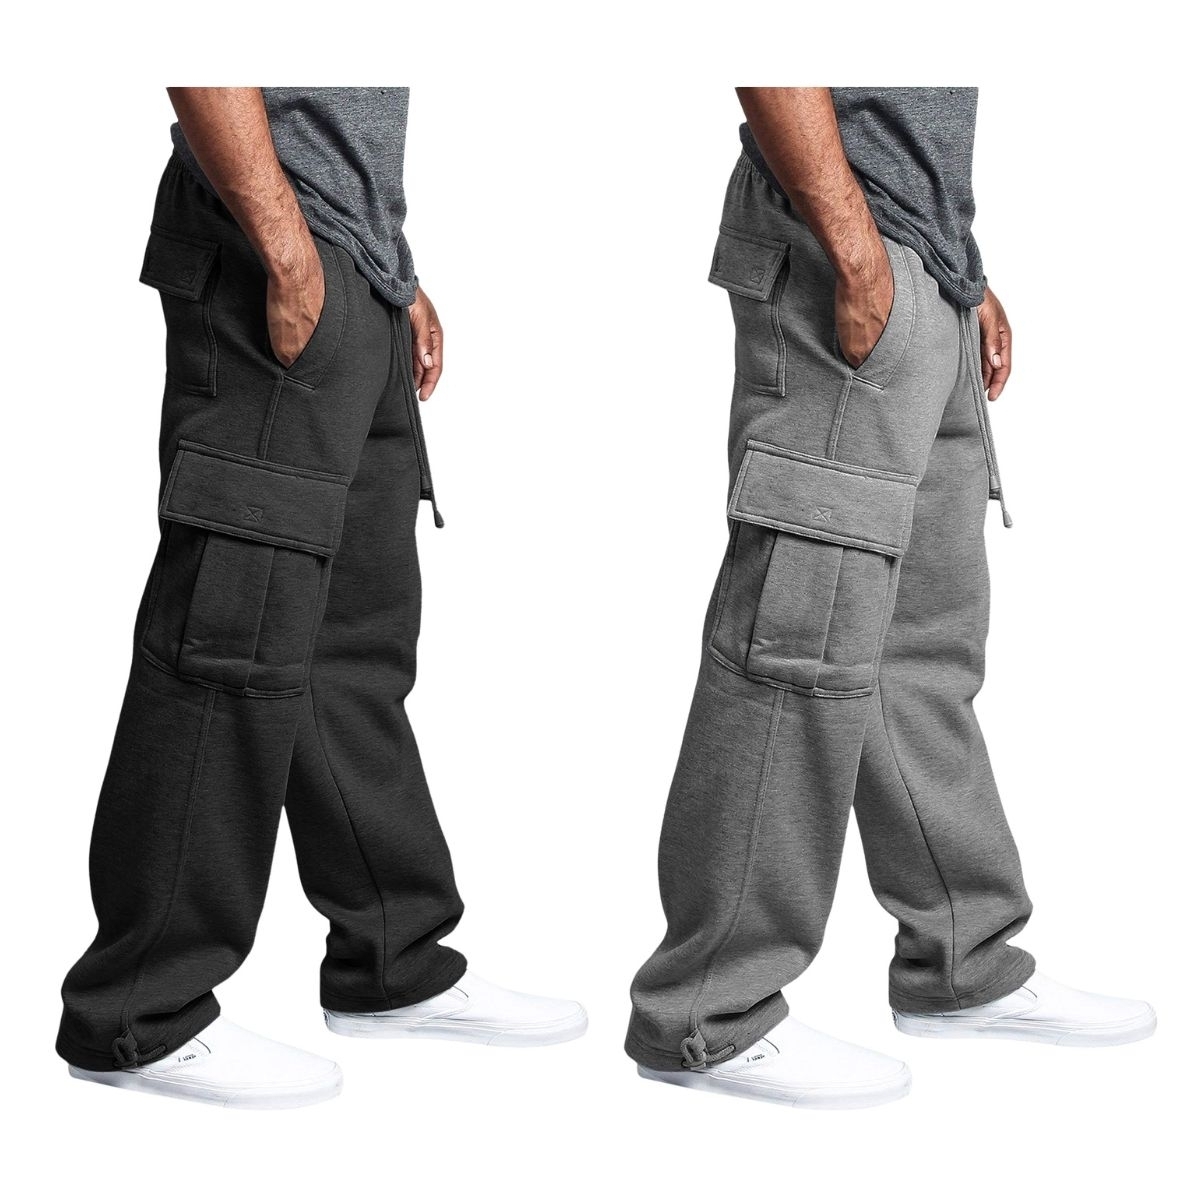 2-Pack: Men's Casual Solid Fleece Lined Cargo Jogger Soft Sweatpants With Pockets - Black&black, Large